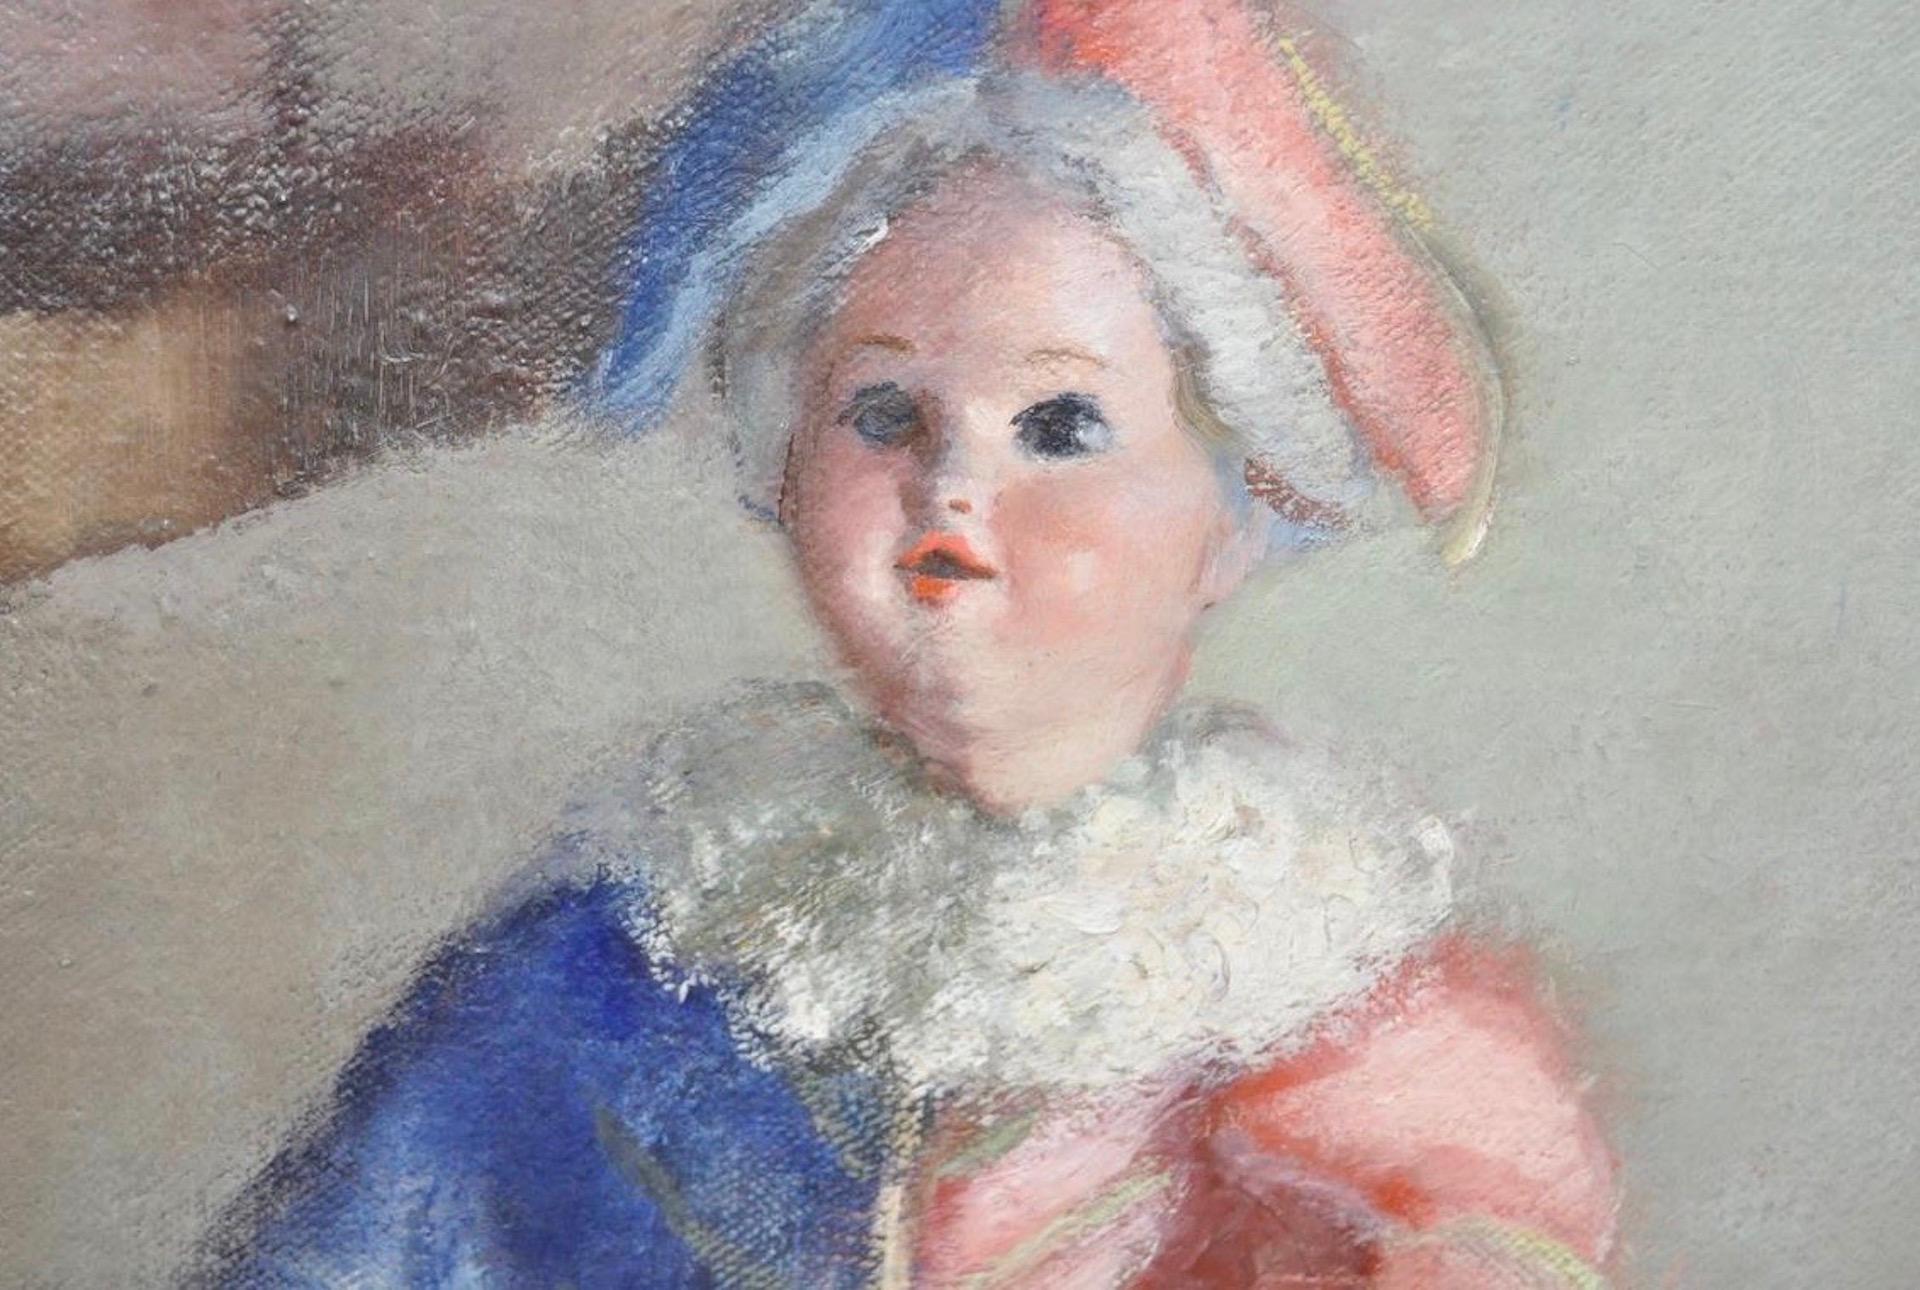 The Doll and the Rose Still Life Oil Painting c.1930

Wonderful oil on canvas by a talented artist. The painting is signed in the lower right corner, and on the back (partially illegible).

This charming doll in her harlequin outfit, and a rose at